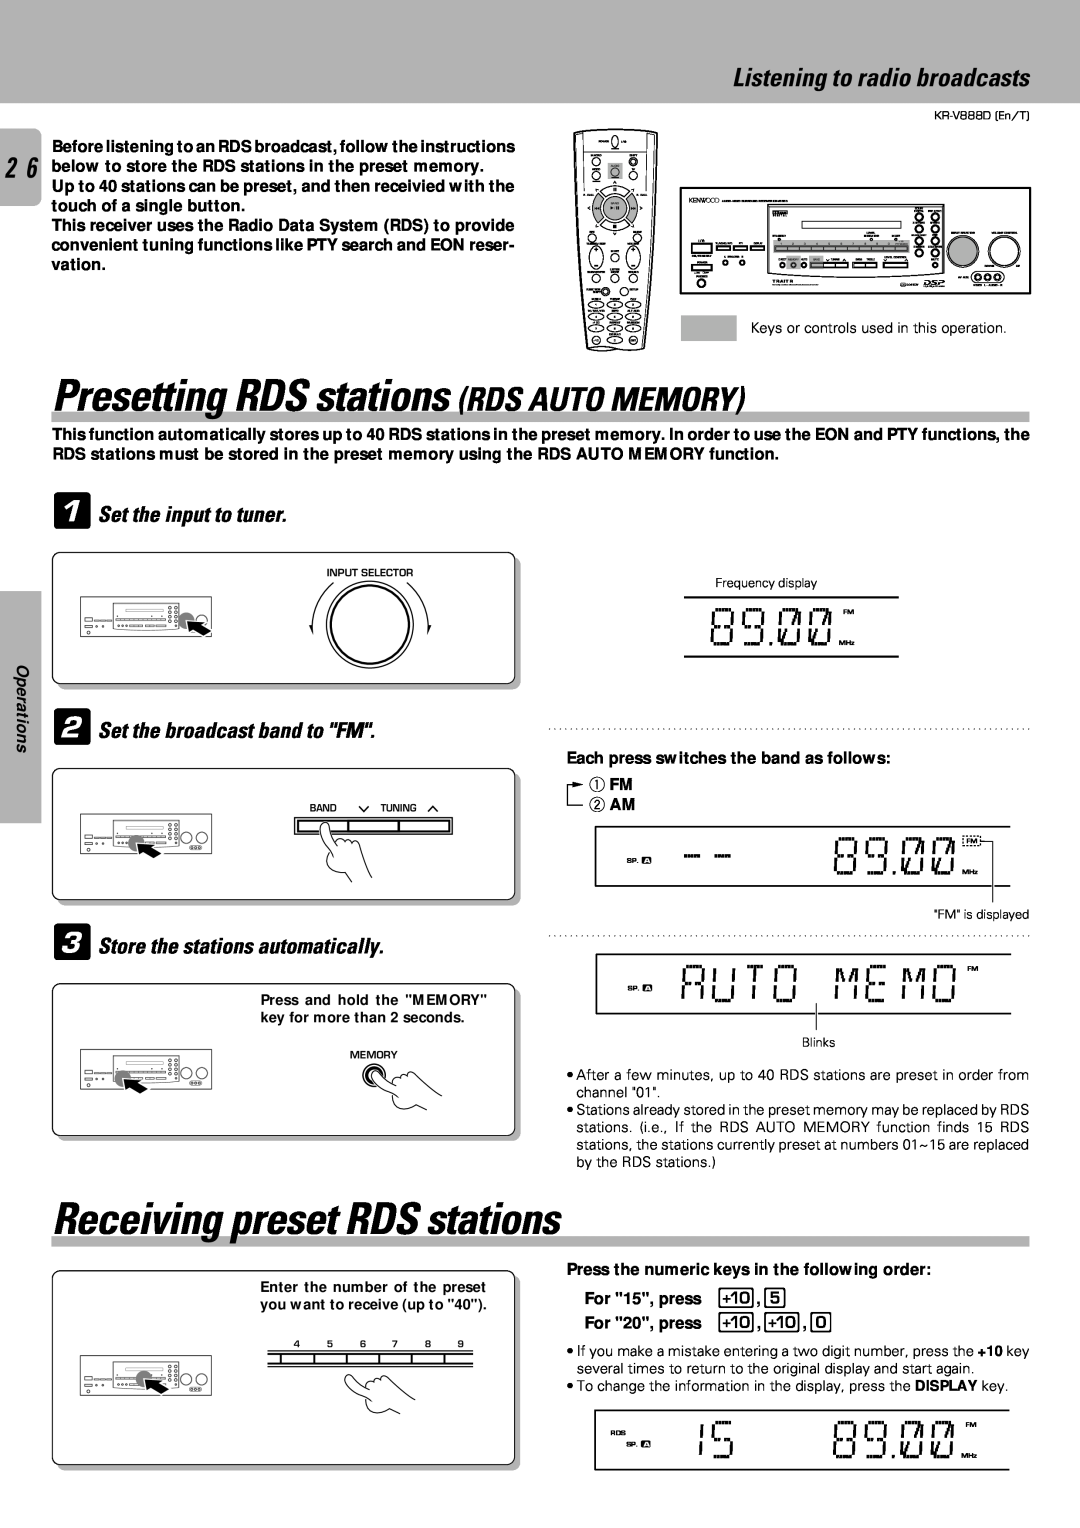 Kenwood KR-V888D Auto Me Mo, Presetting RDS stations RDS AUTO MEMORY, Receiving preset RDS stations, 89. FM, 89.MHz 